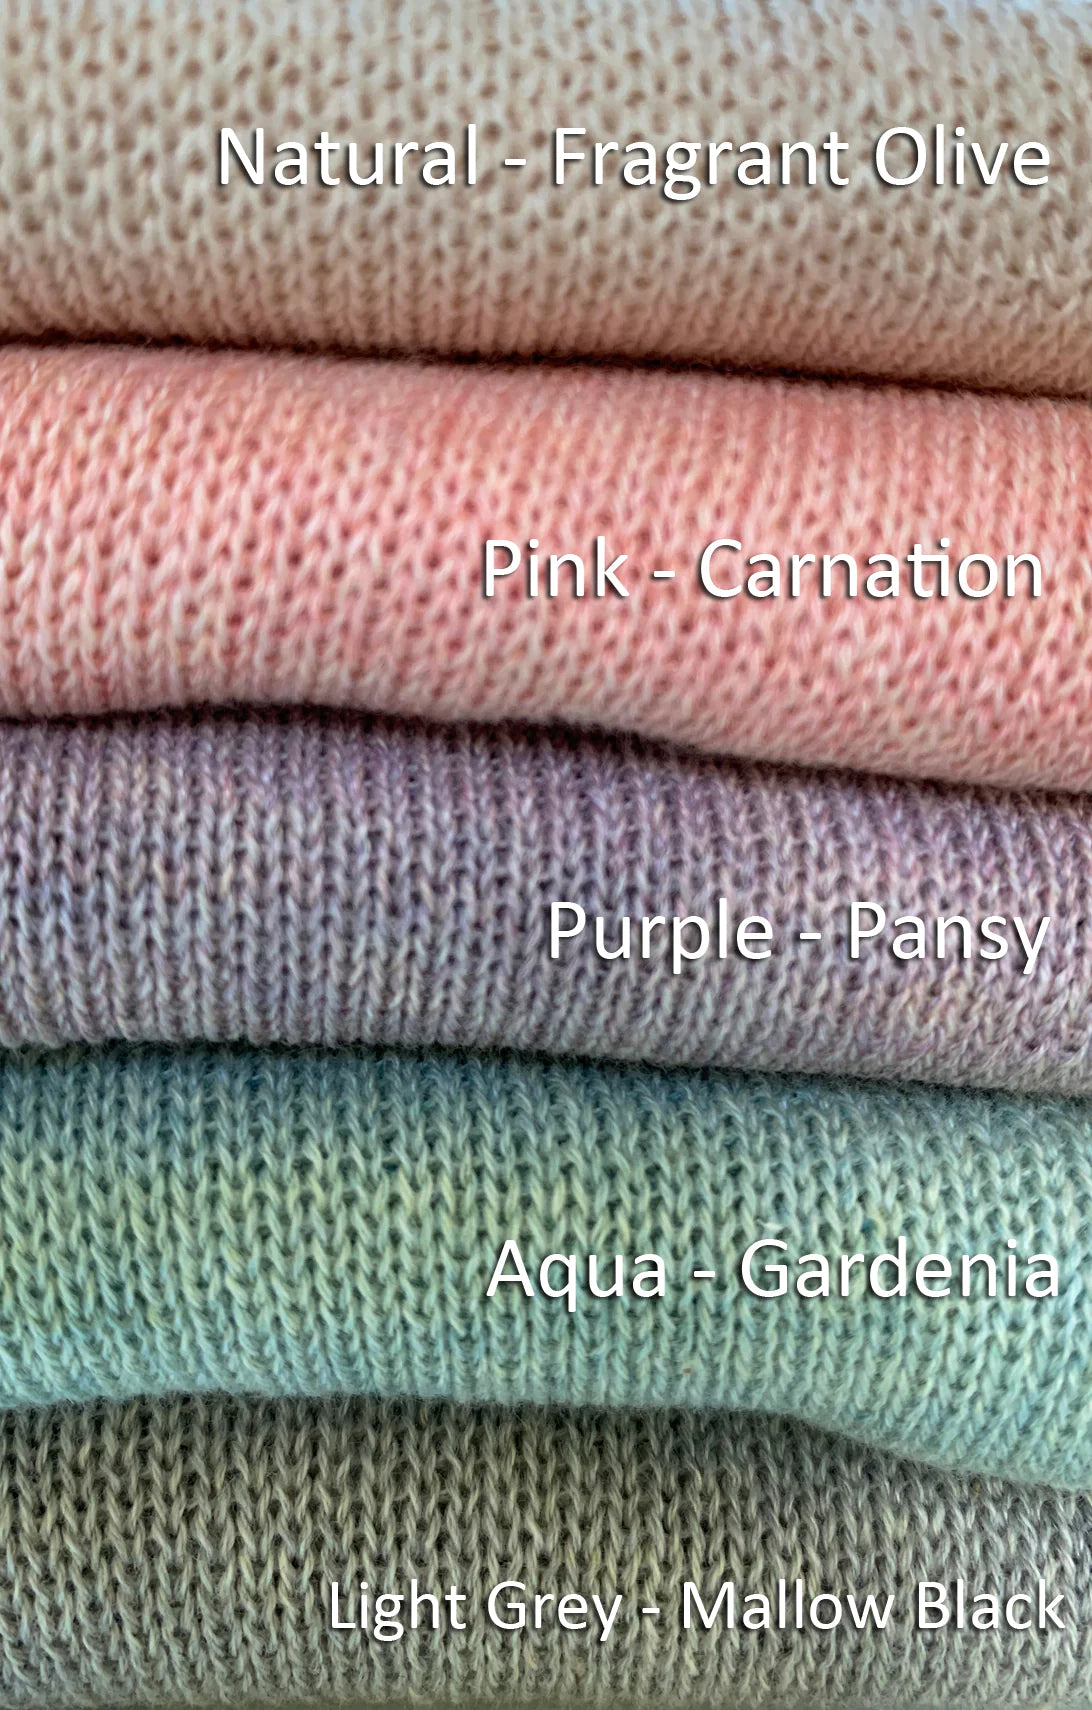 Five color samples of Tabi Socks Wellness botanically dyed organic cotton gloves in natural, pink, purple, aqua, and light gray colors